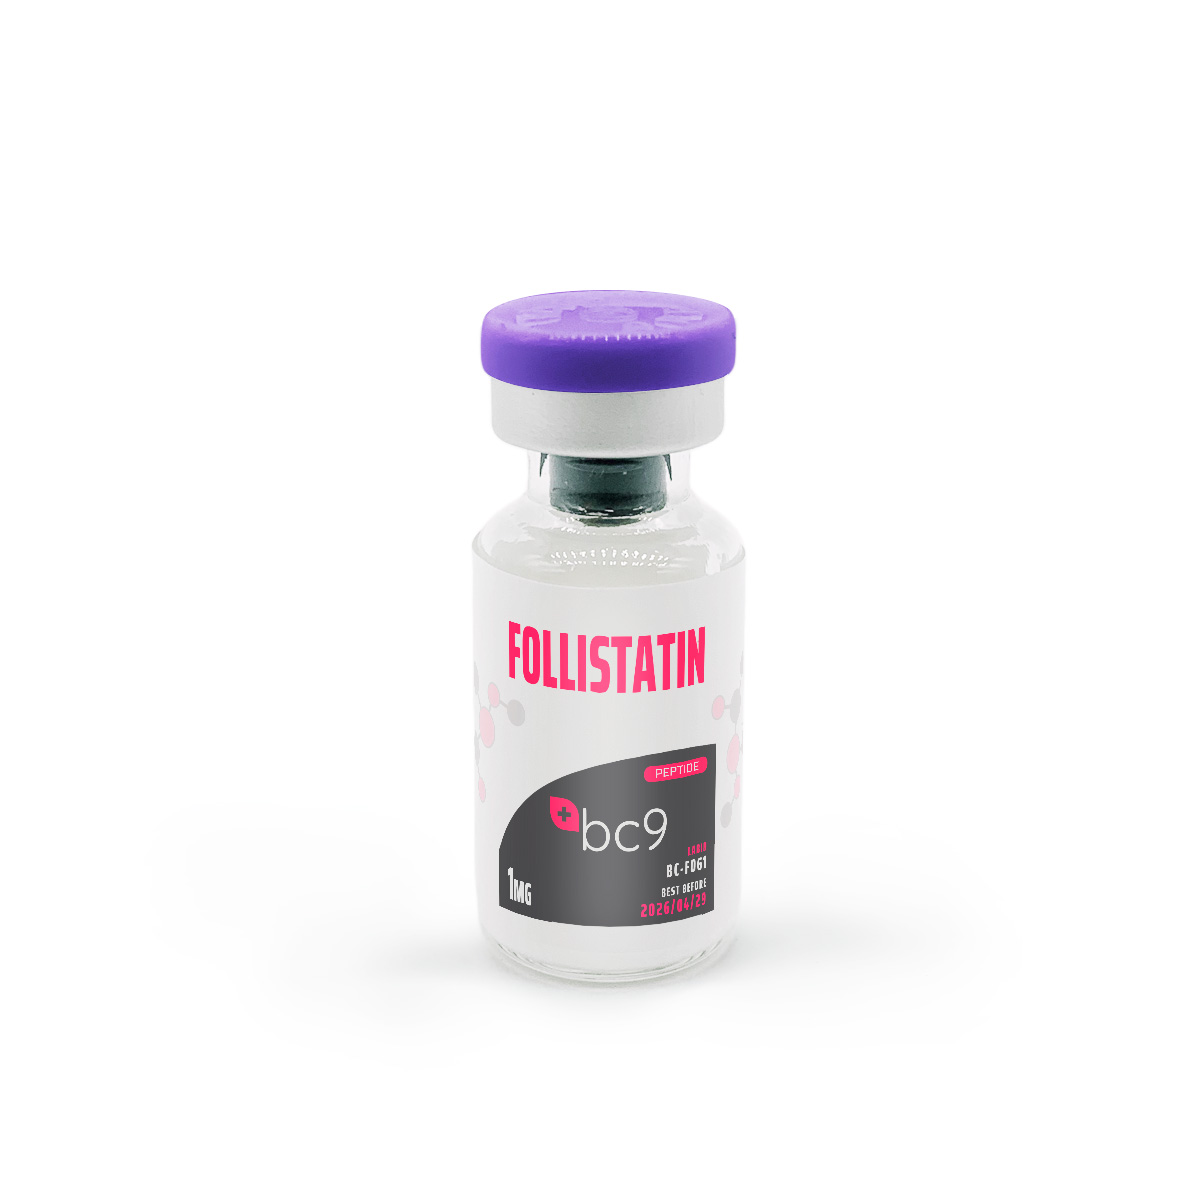 Follistatin Peptide for Sale | Fast Shipping | BC9.org